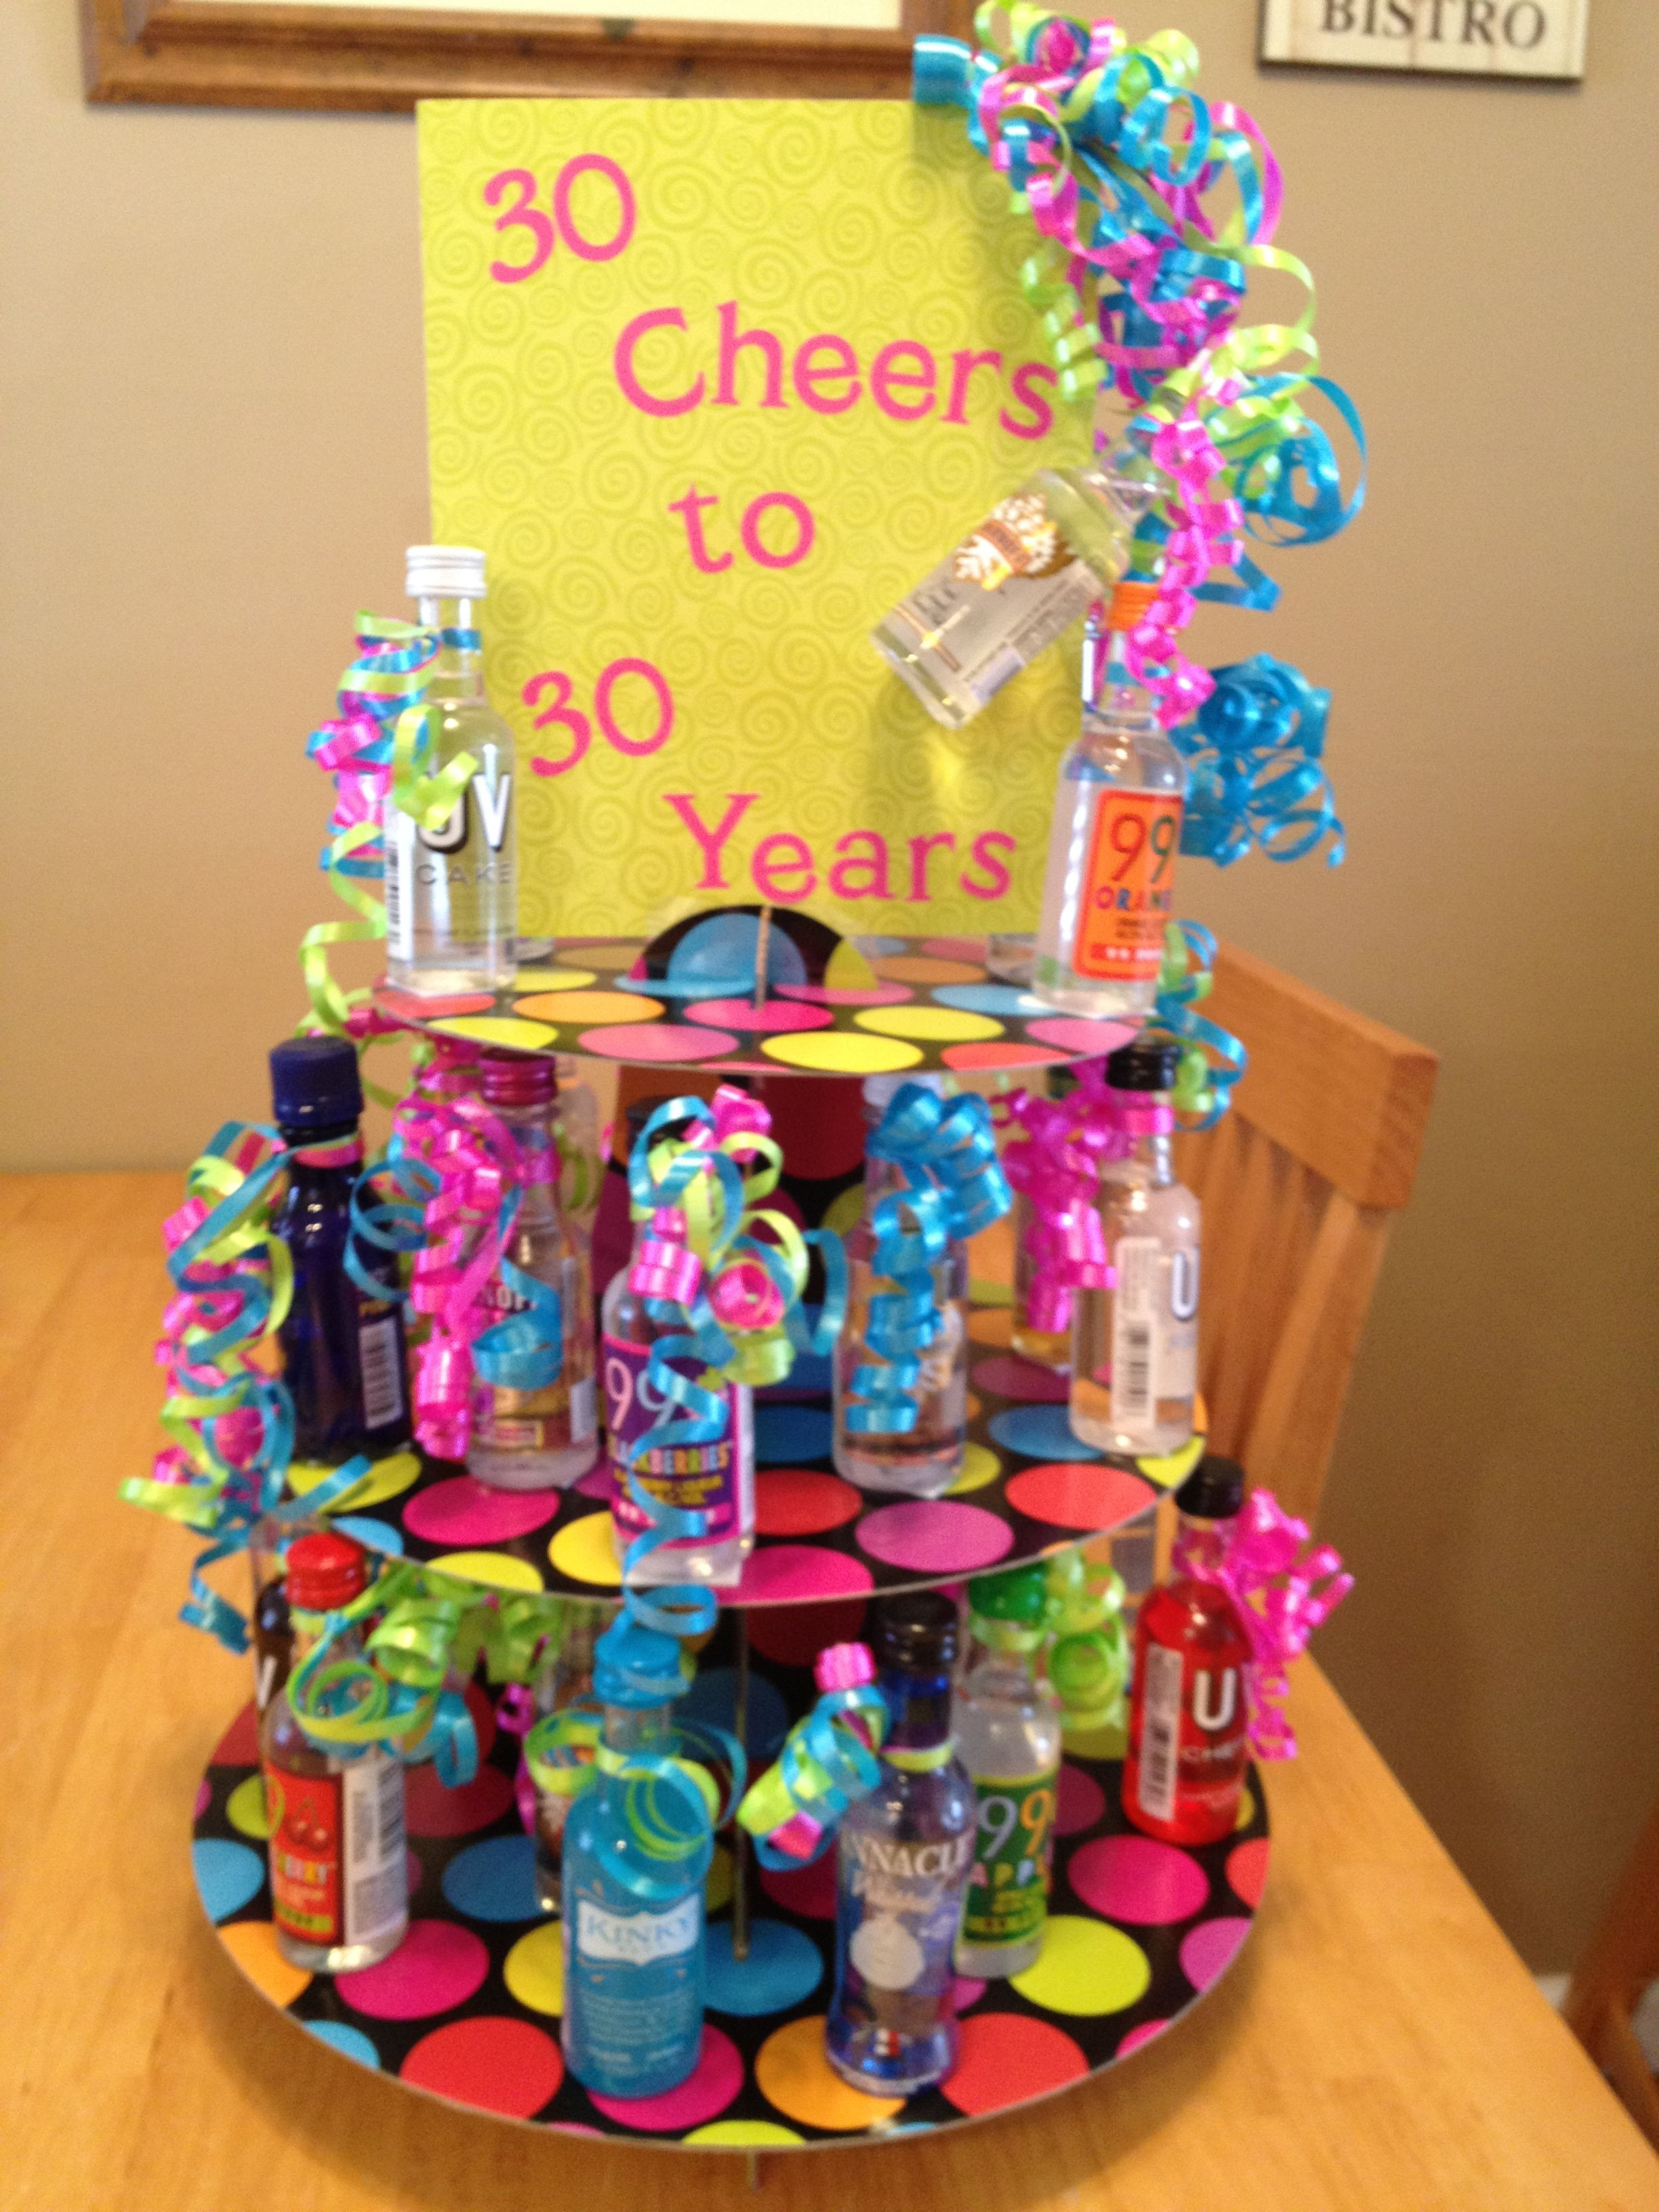 Best ideas about 30 Gifts For 30th Birthday
. Save or Pin 30 Cheers to 30 Years 30th Birthday t Now.